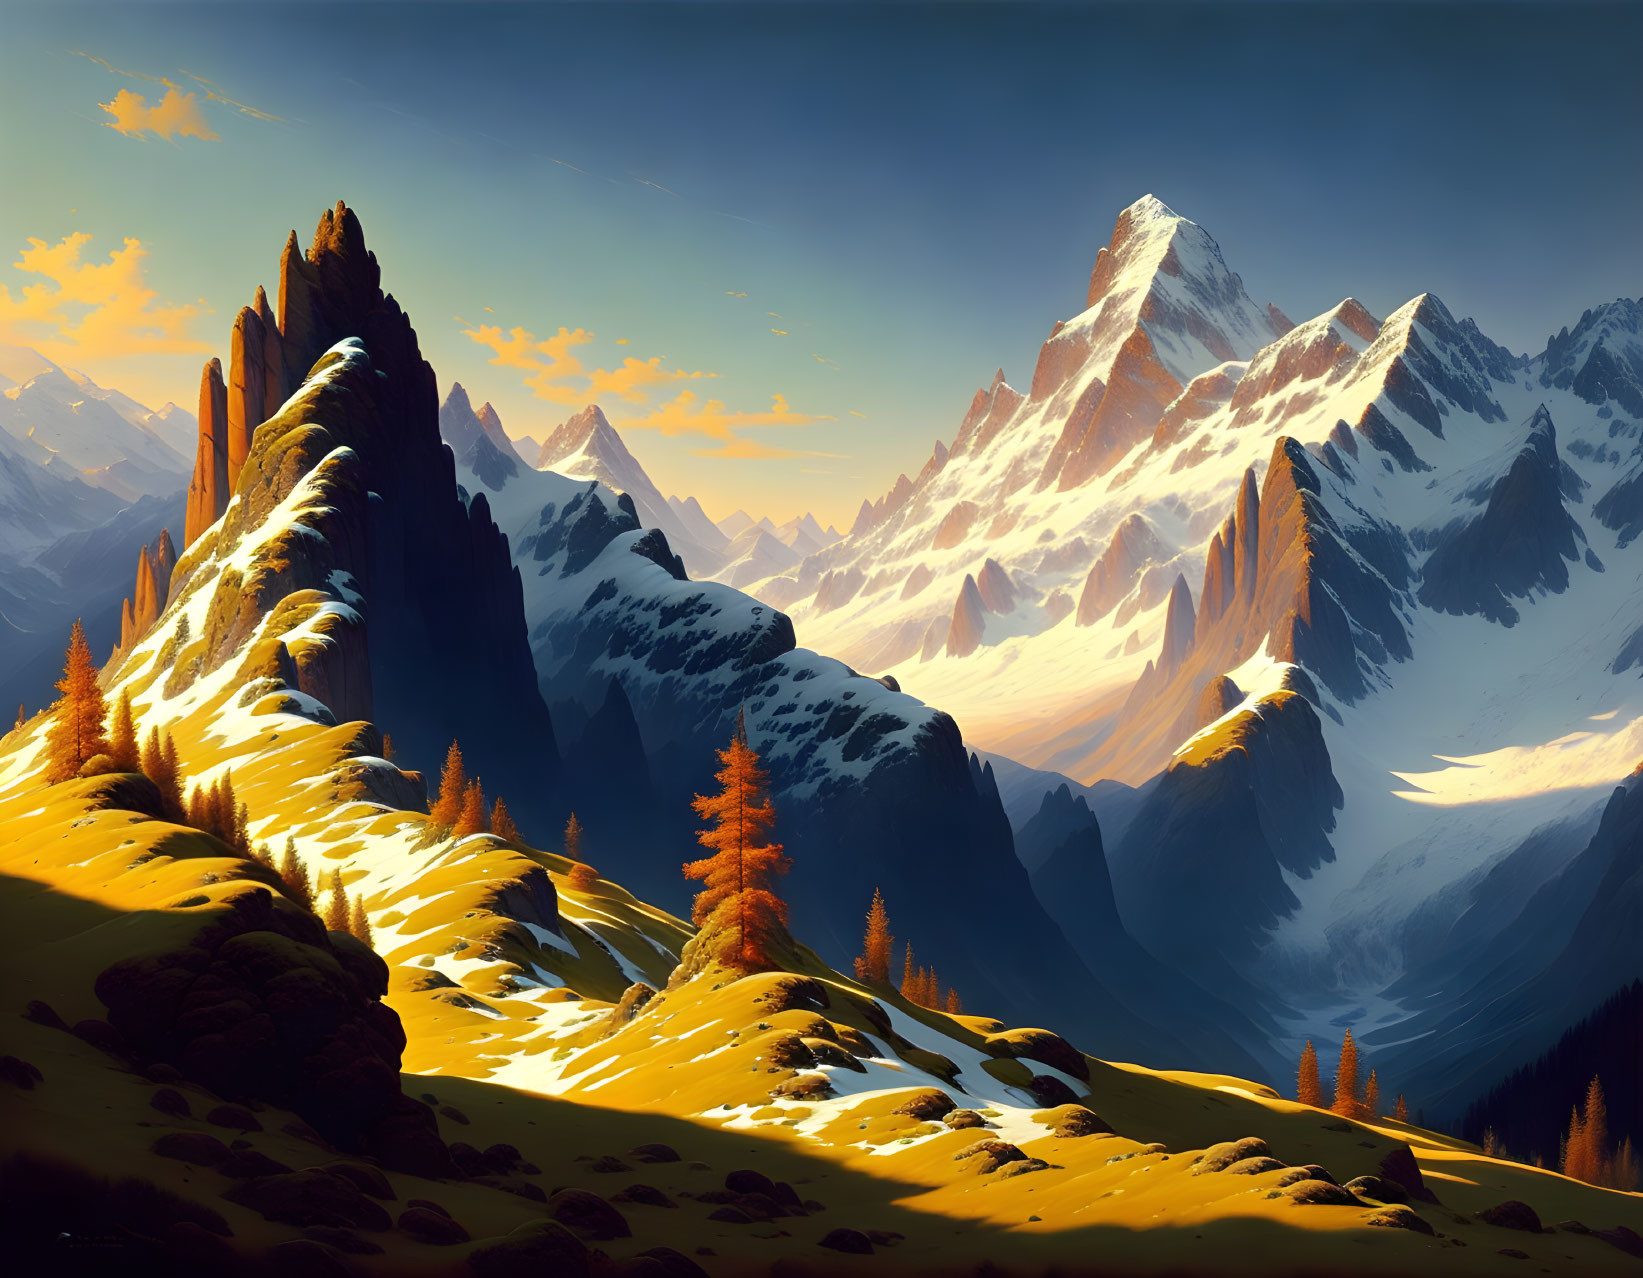 Snowy Mountain Peaks and Golden Trees in Sunlit Landscape